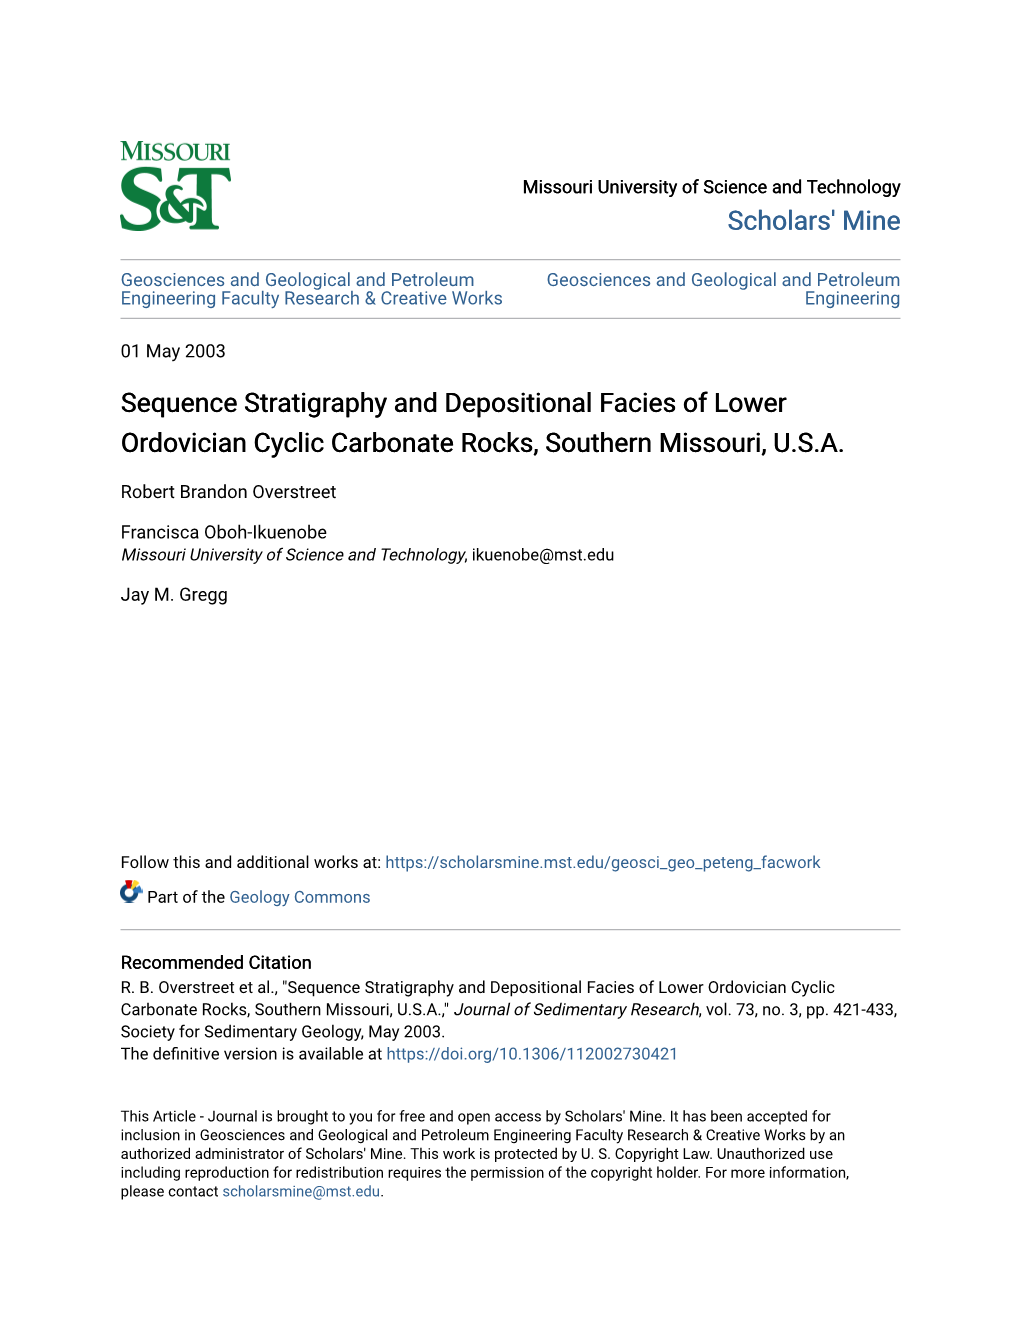 Sequence Stratigraphy and Depositional Facies of Lower Ordovician Cyclic Carbonate Rocks, Southern Missouri, U.S.A